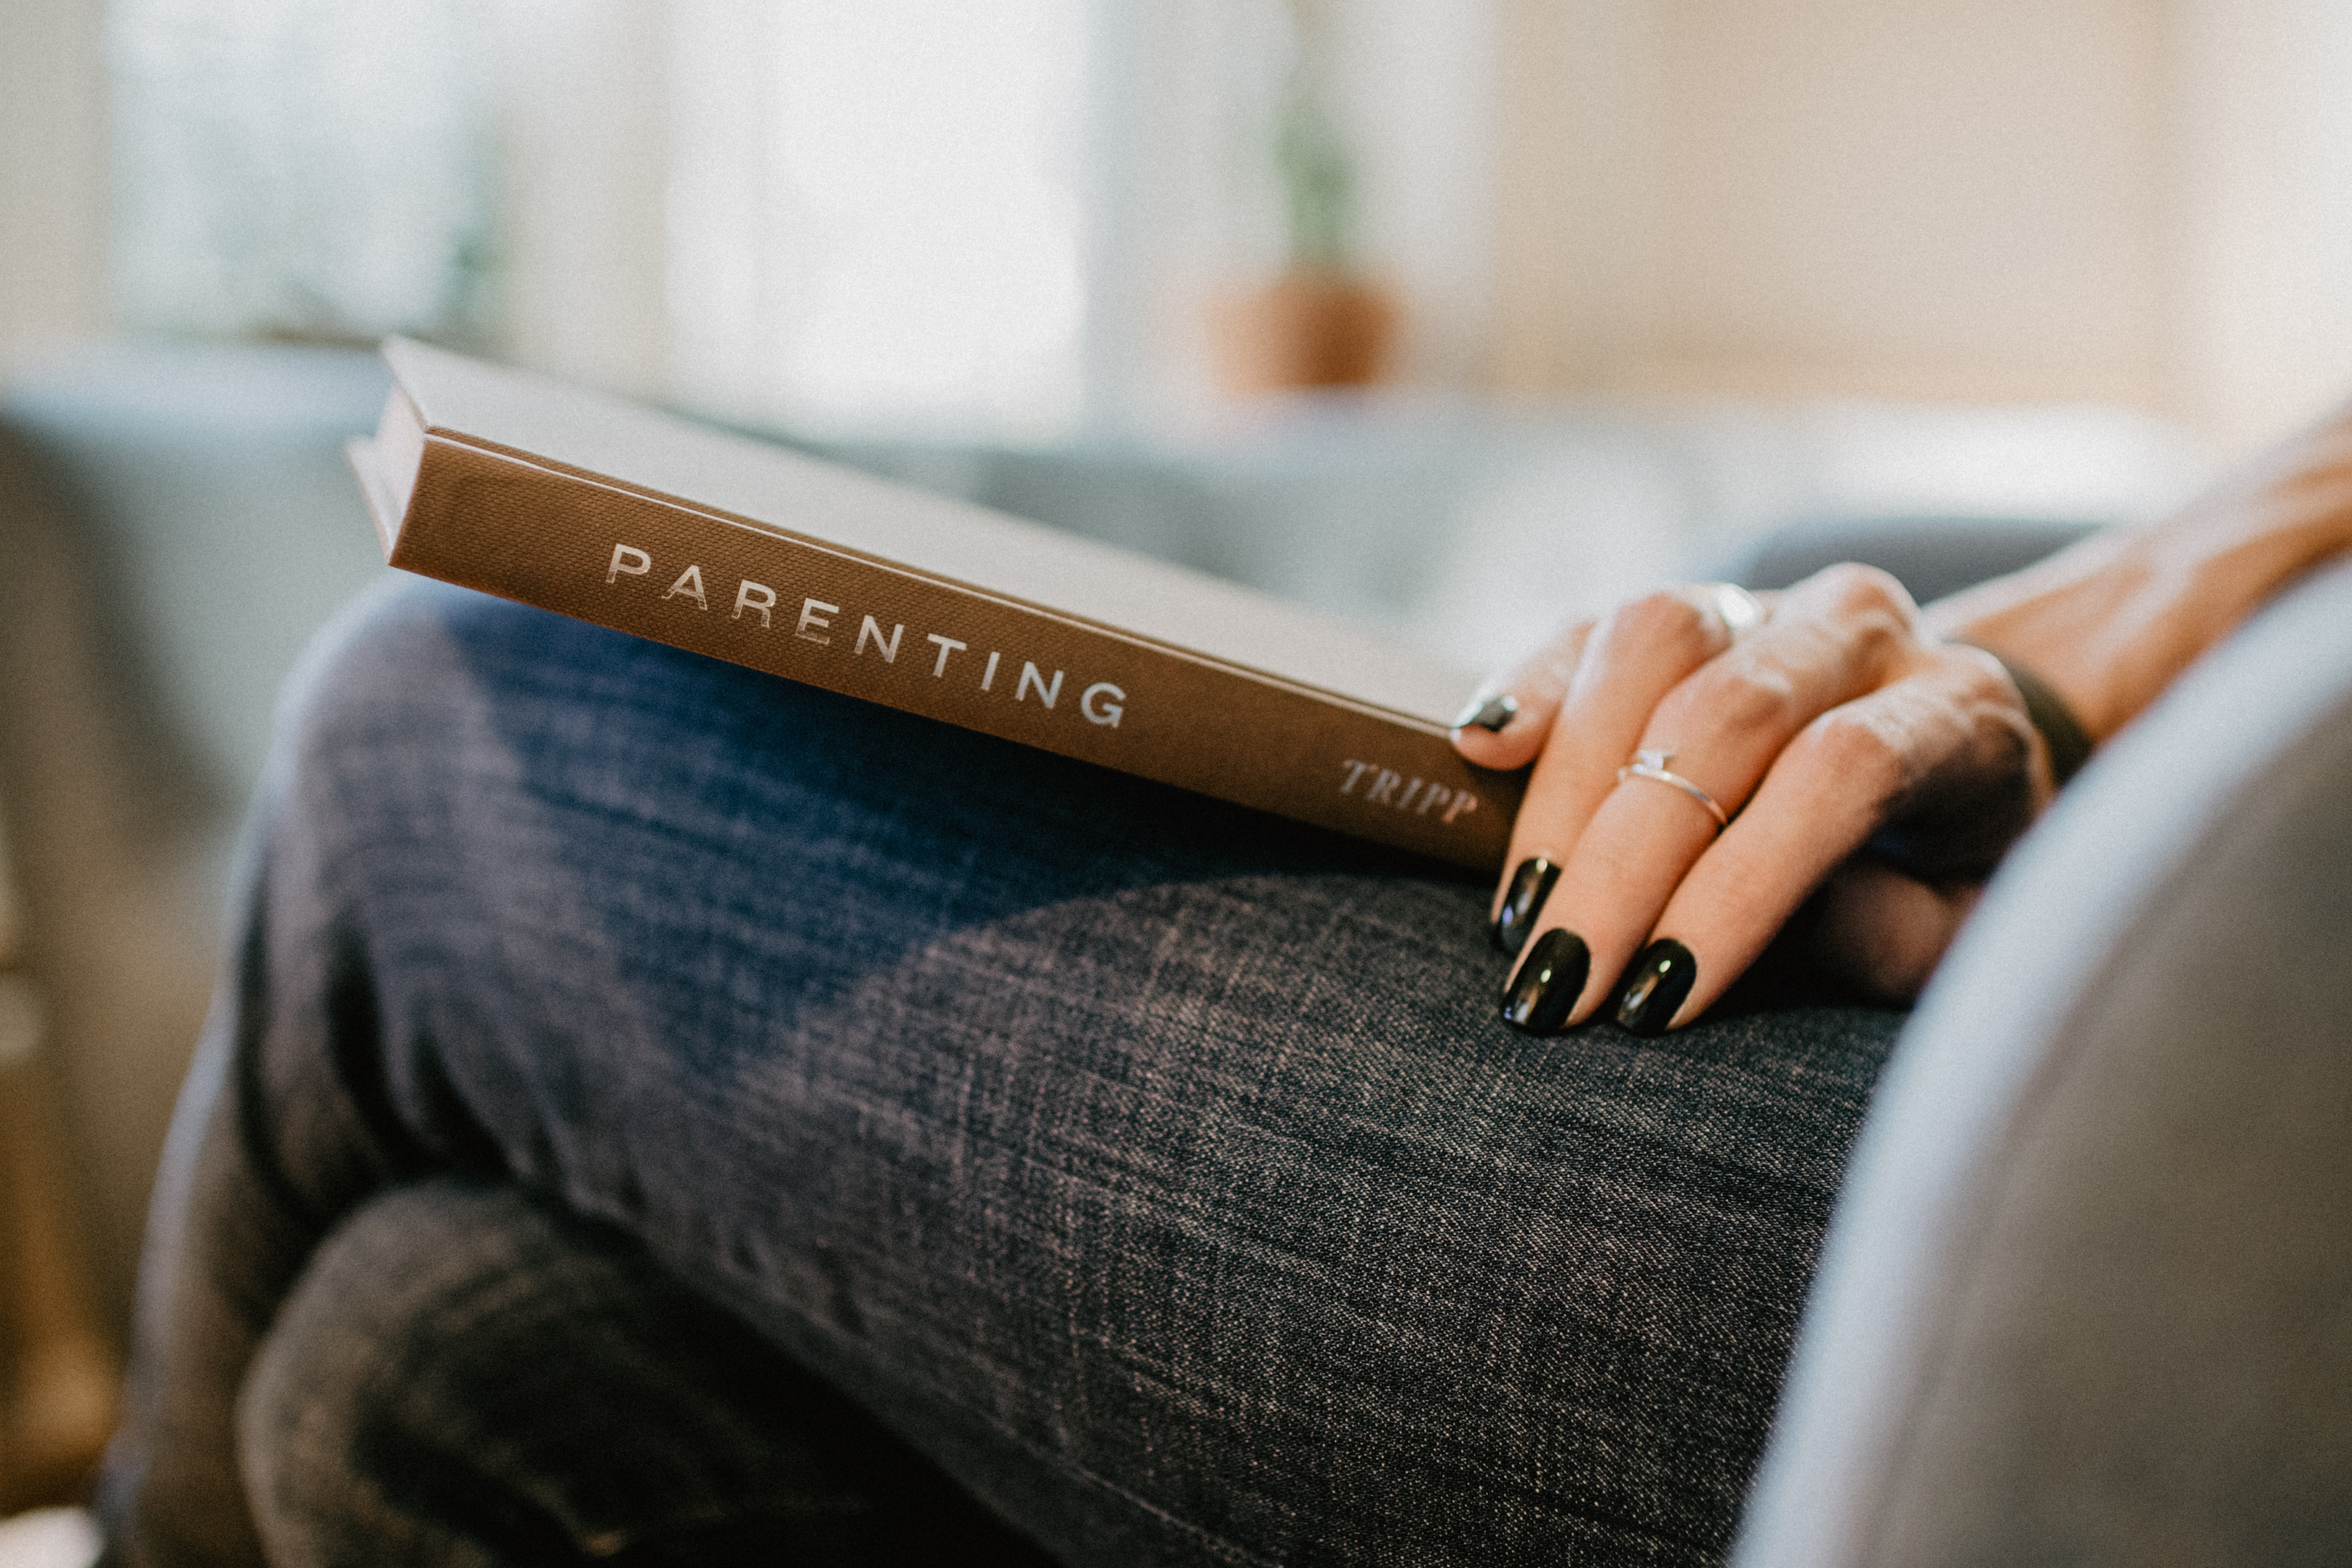  A book titled "parenting" sits on a woman's lap.